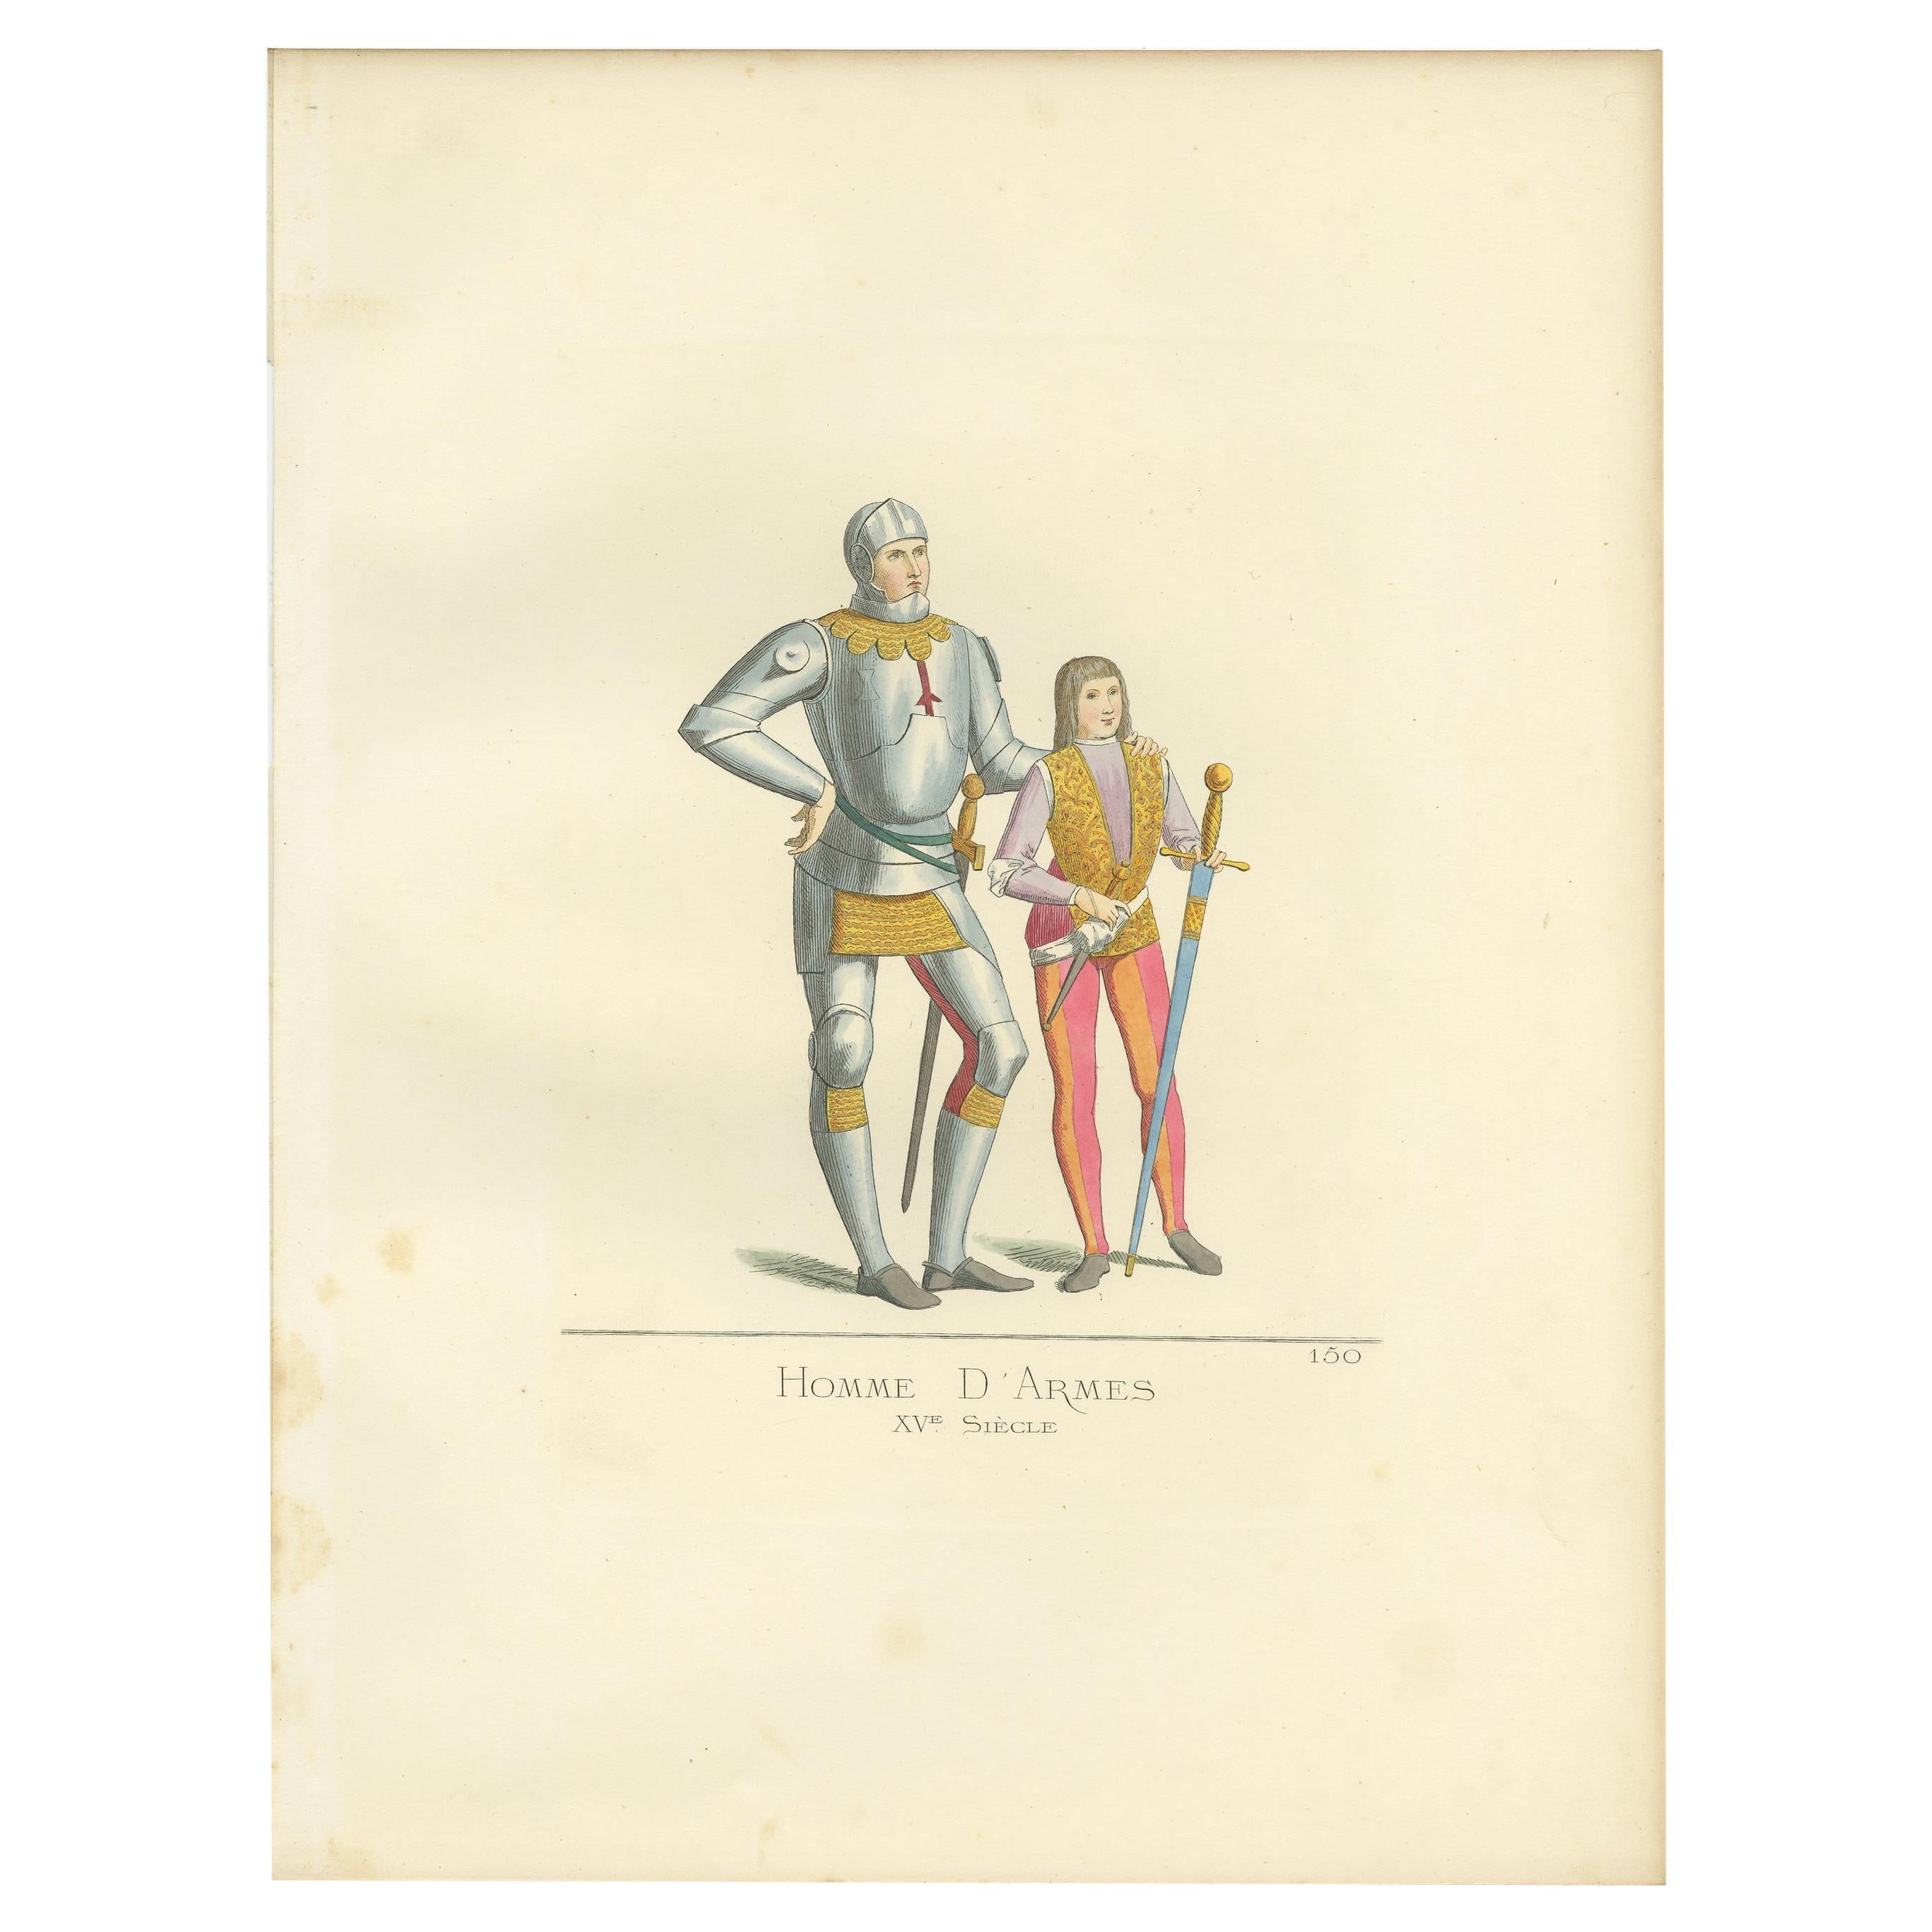 Antique Print of Italian Soldiers, 15th Century, by Bonnard, 1860